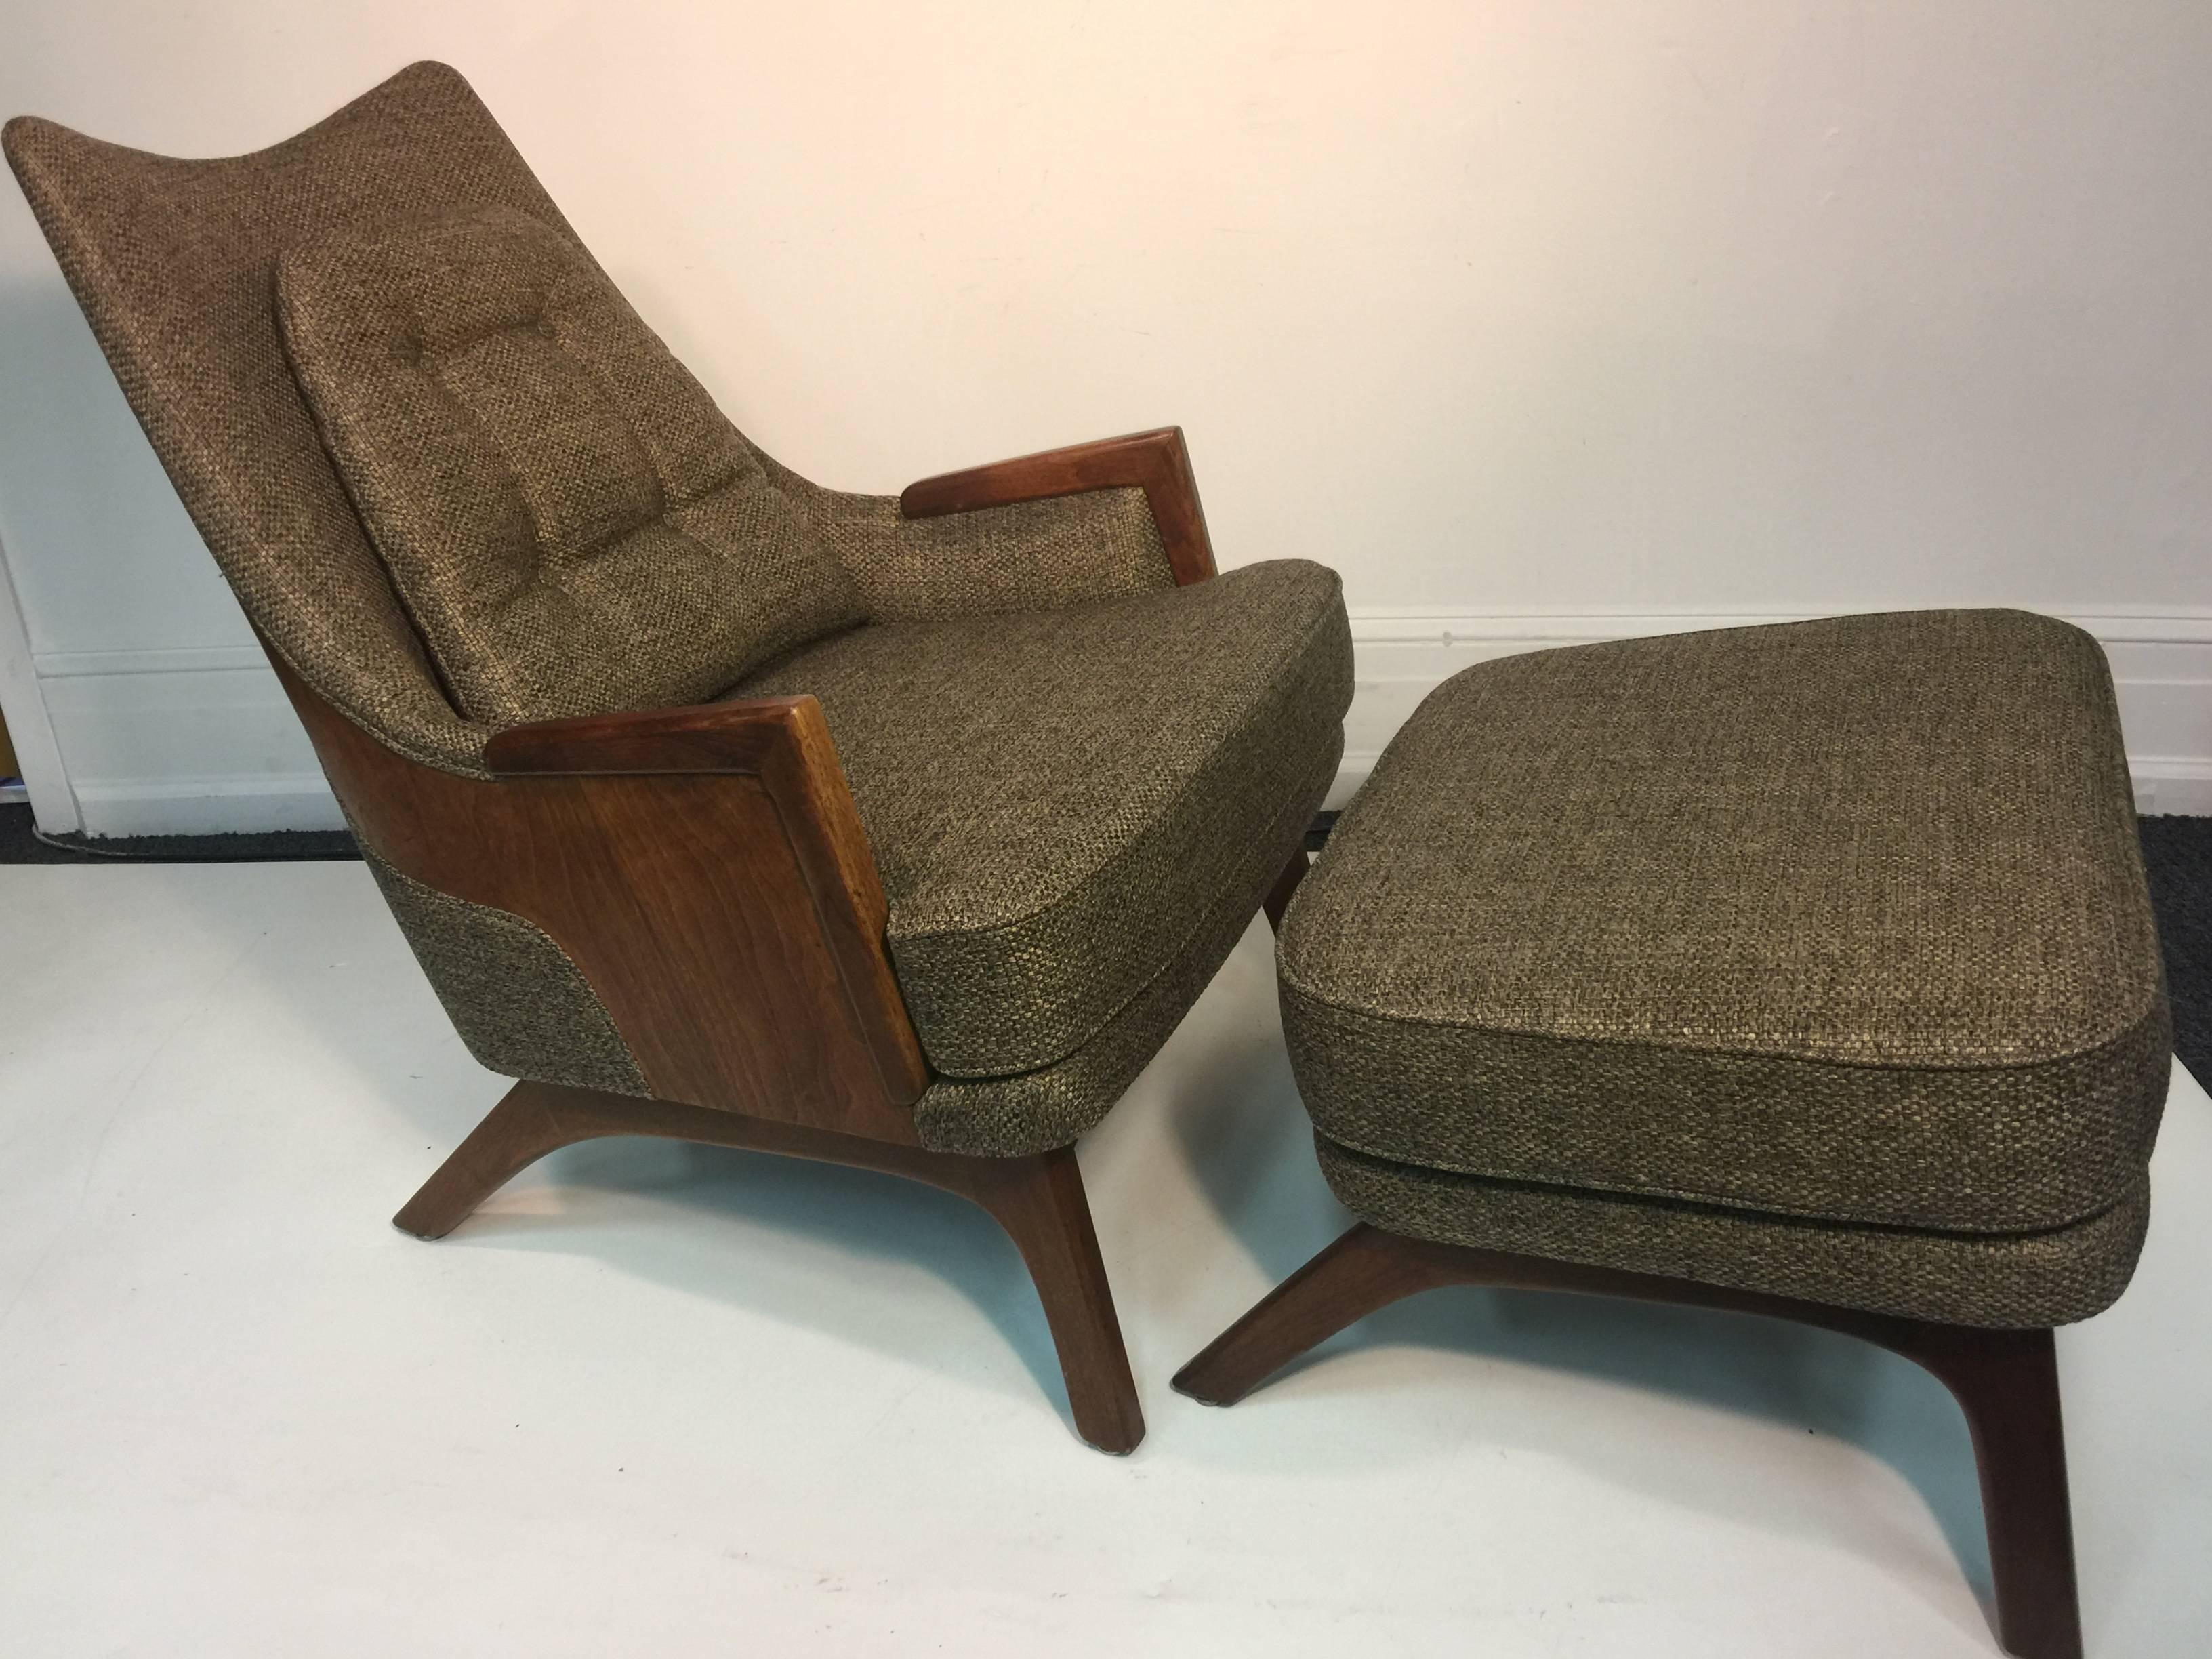 Great aerodynamic design armchair with ottoman upholstered in a beautiful brownish oatmeal woven fabric with button tufted removeable back pillow with a deep walnut back, angled legs and arms. There is the substantial matching four legged ottoman